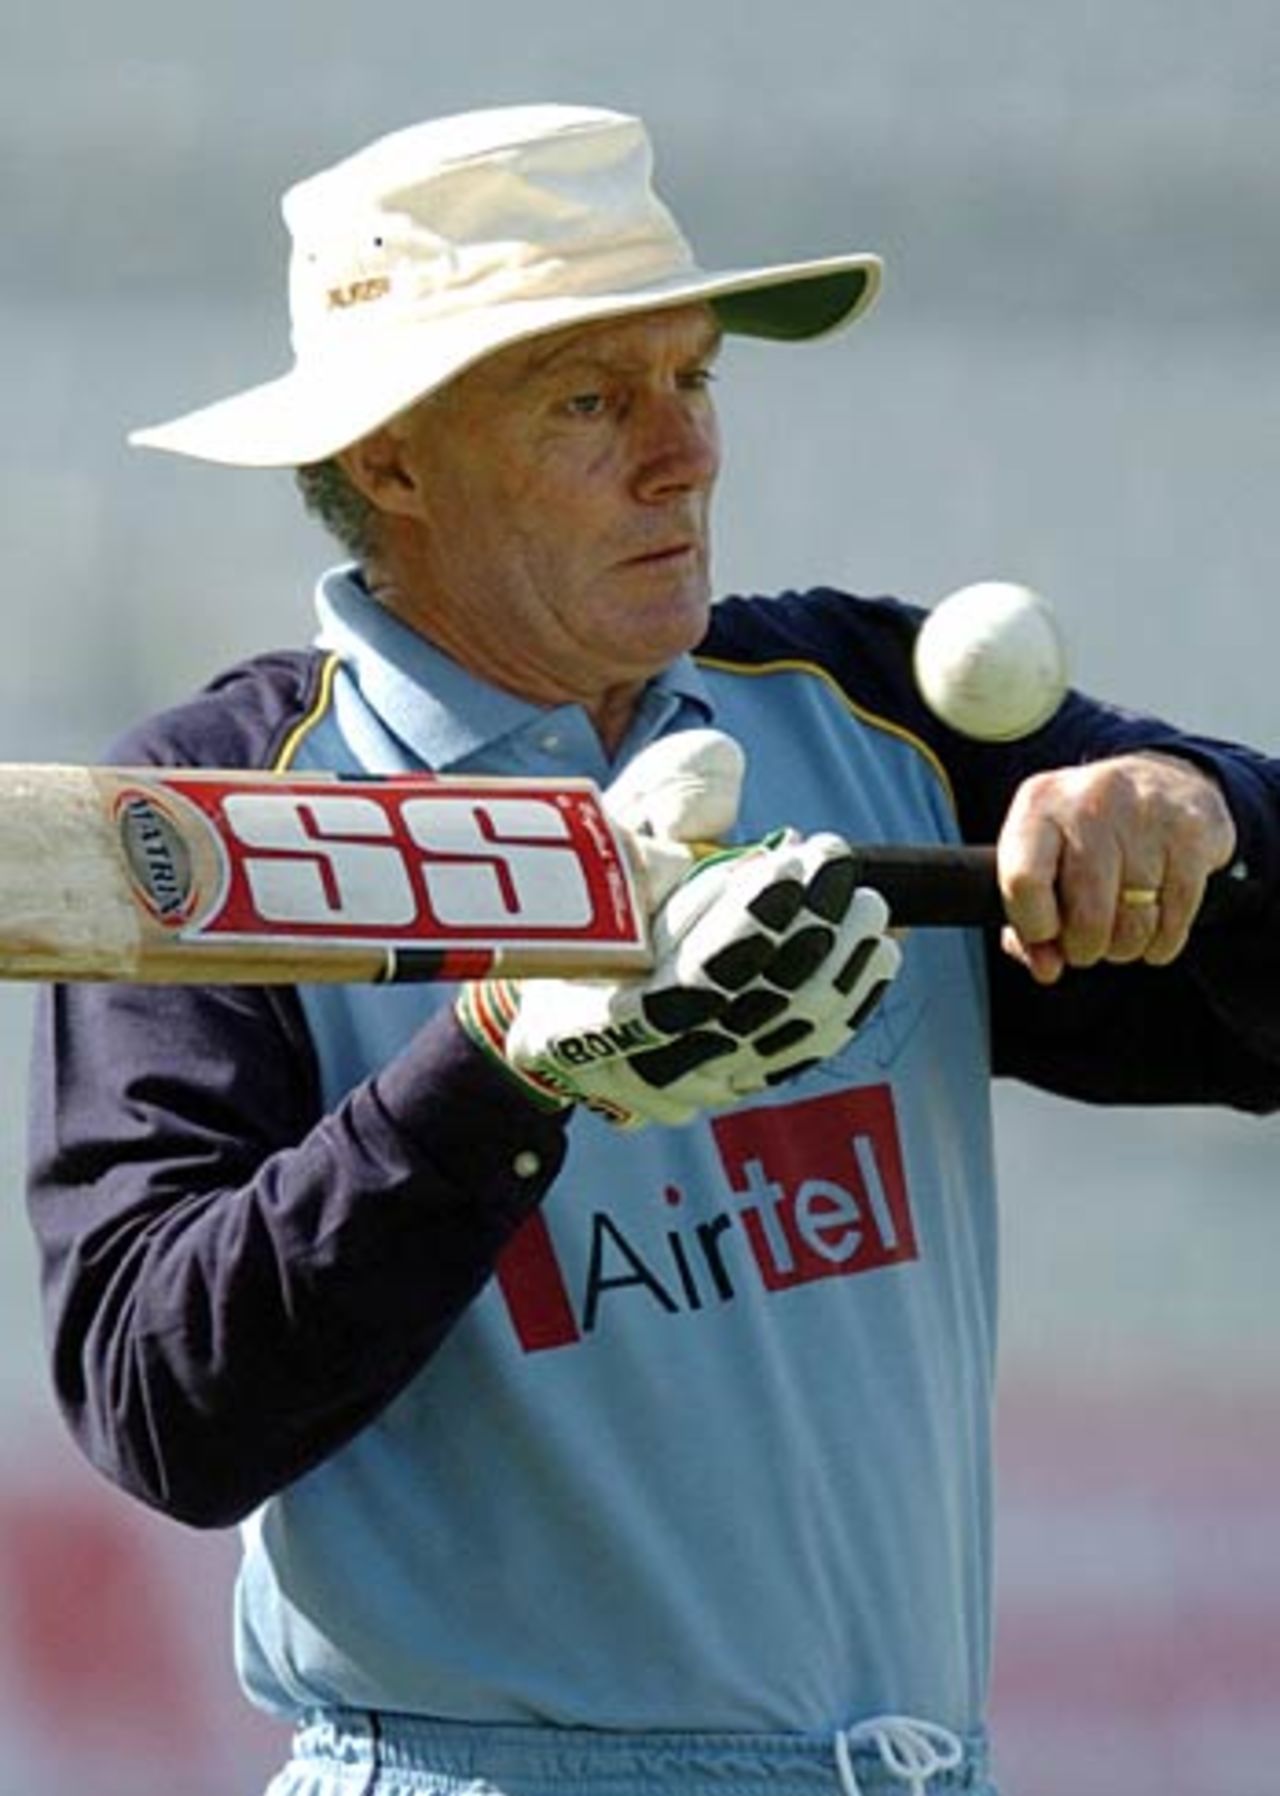 Greg Chappell gives some catching practice ahead of the Challenger Trophy final, Mohali, October 13, 2005